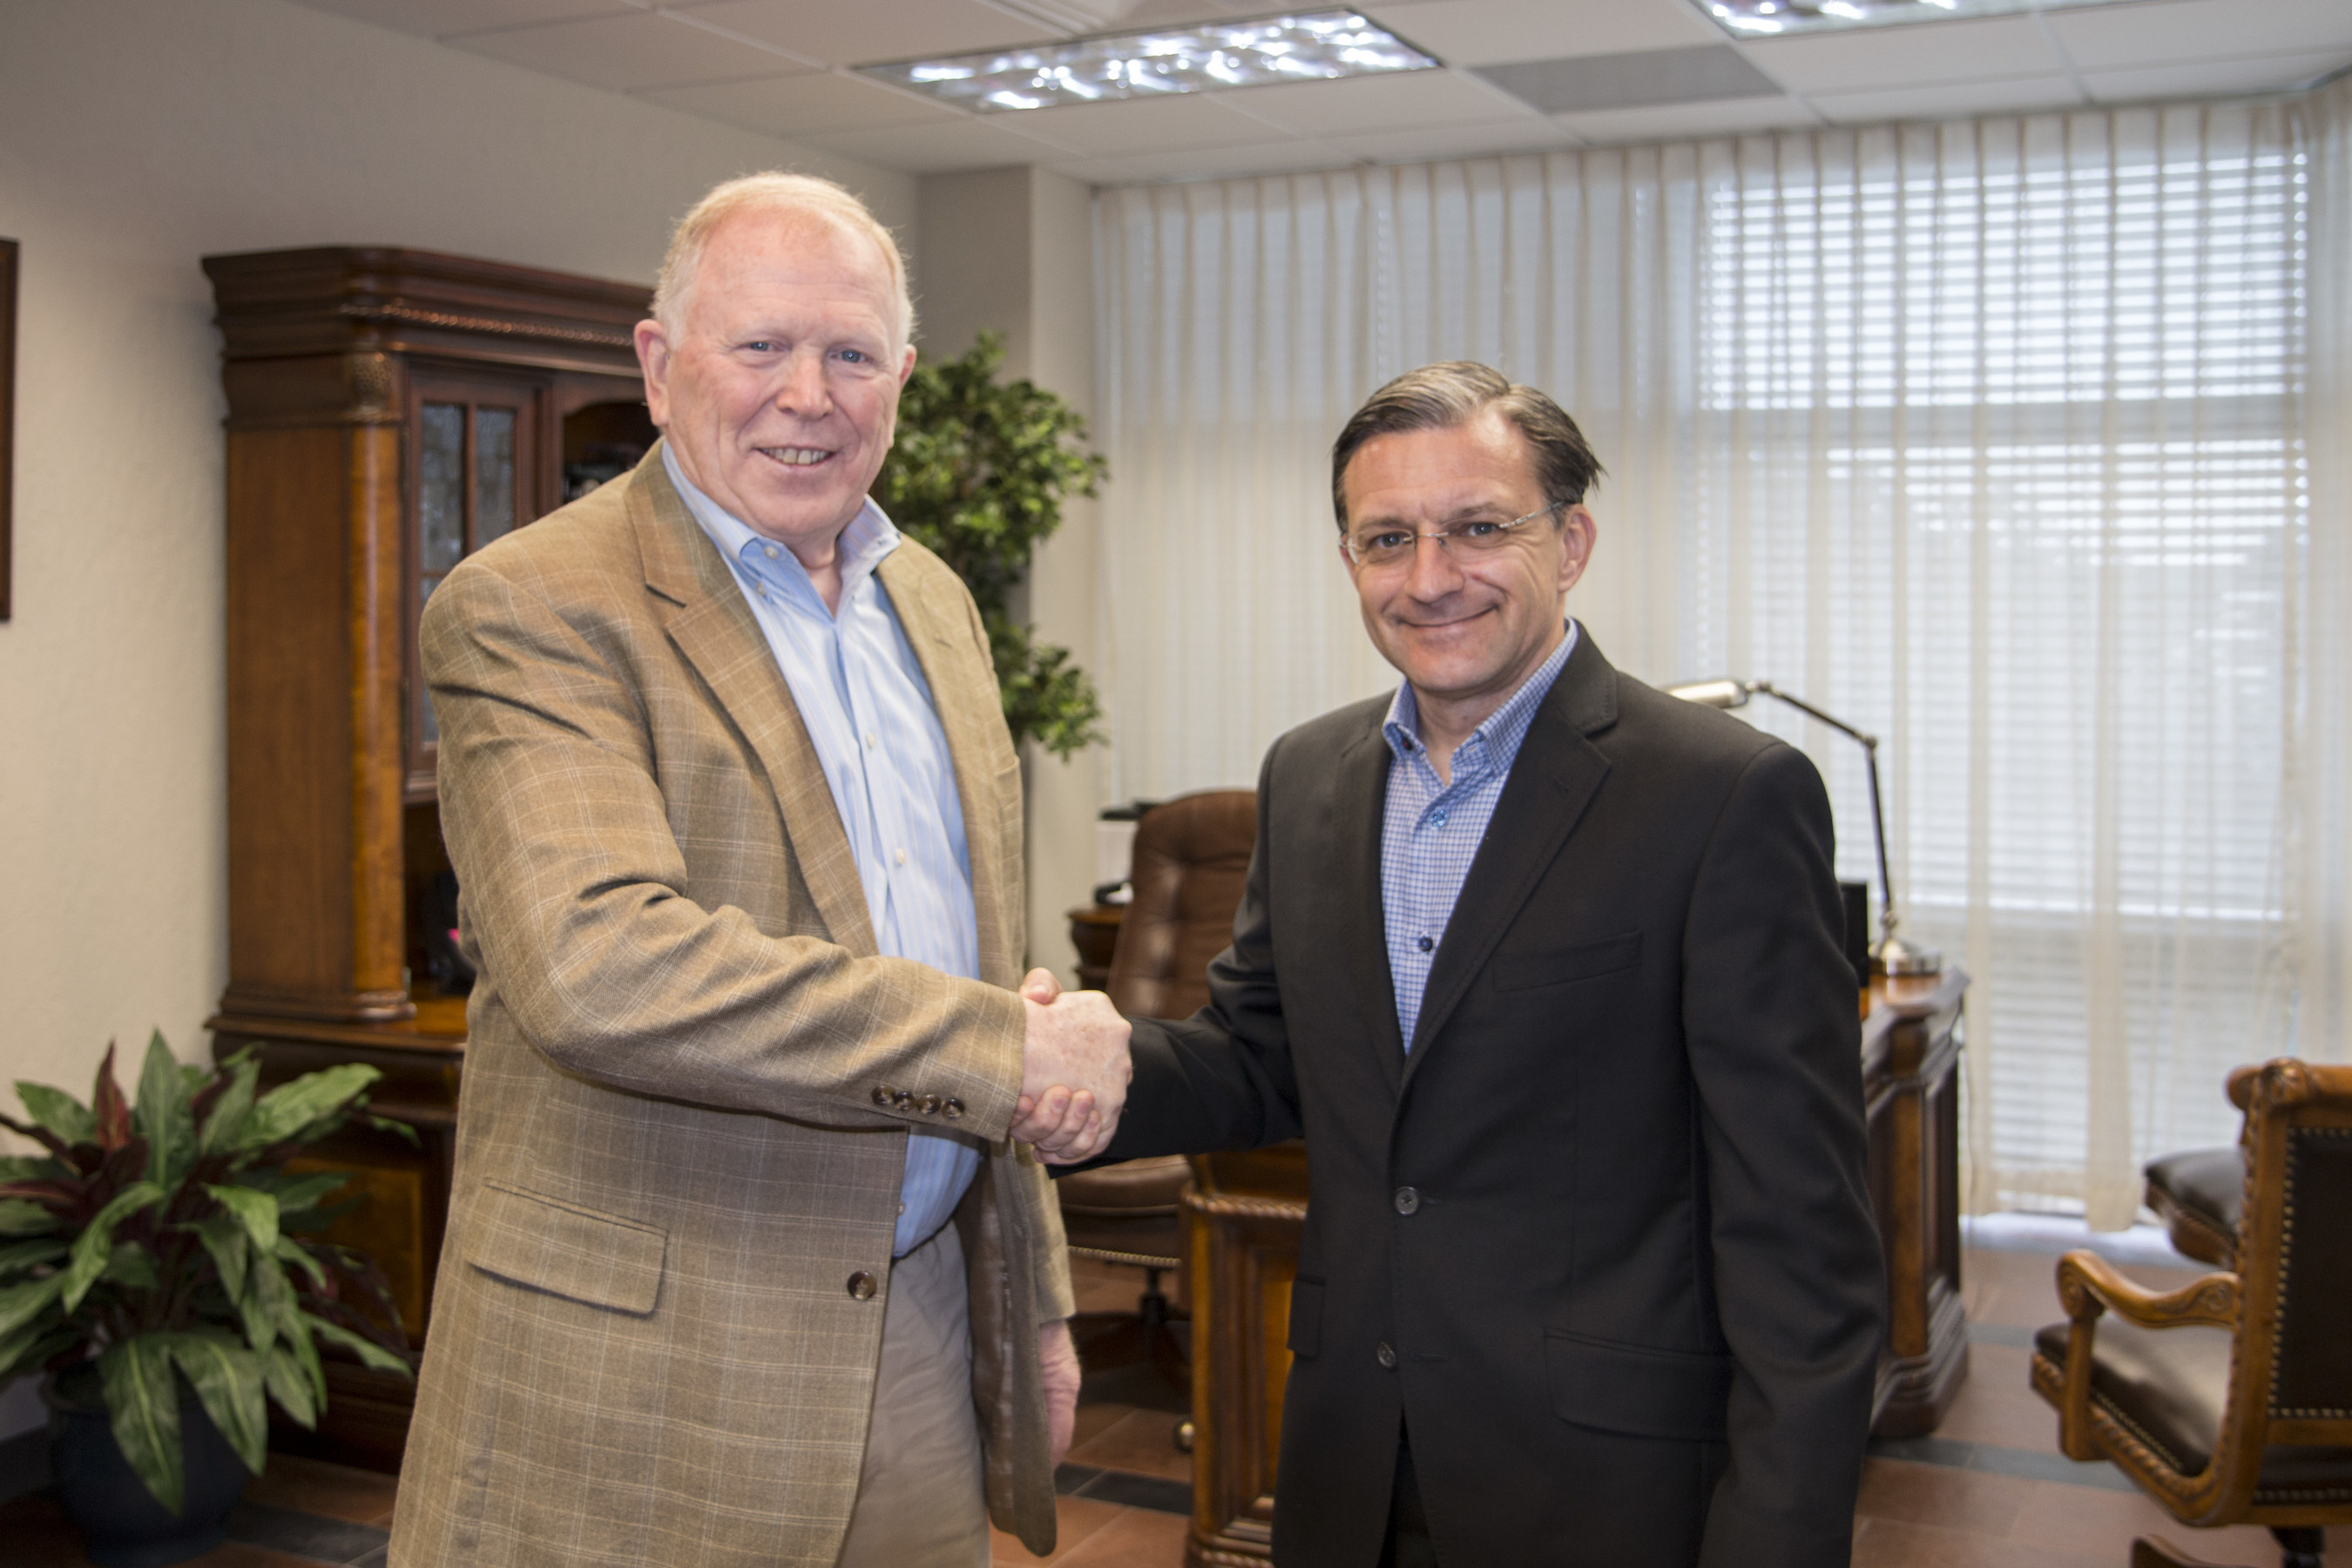 ADU's President, Dr. David Greenlaw and Pearson Online Learning Services COO, Todd Hitchcock shake hands as they renew their partnership.